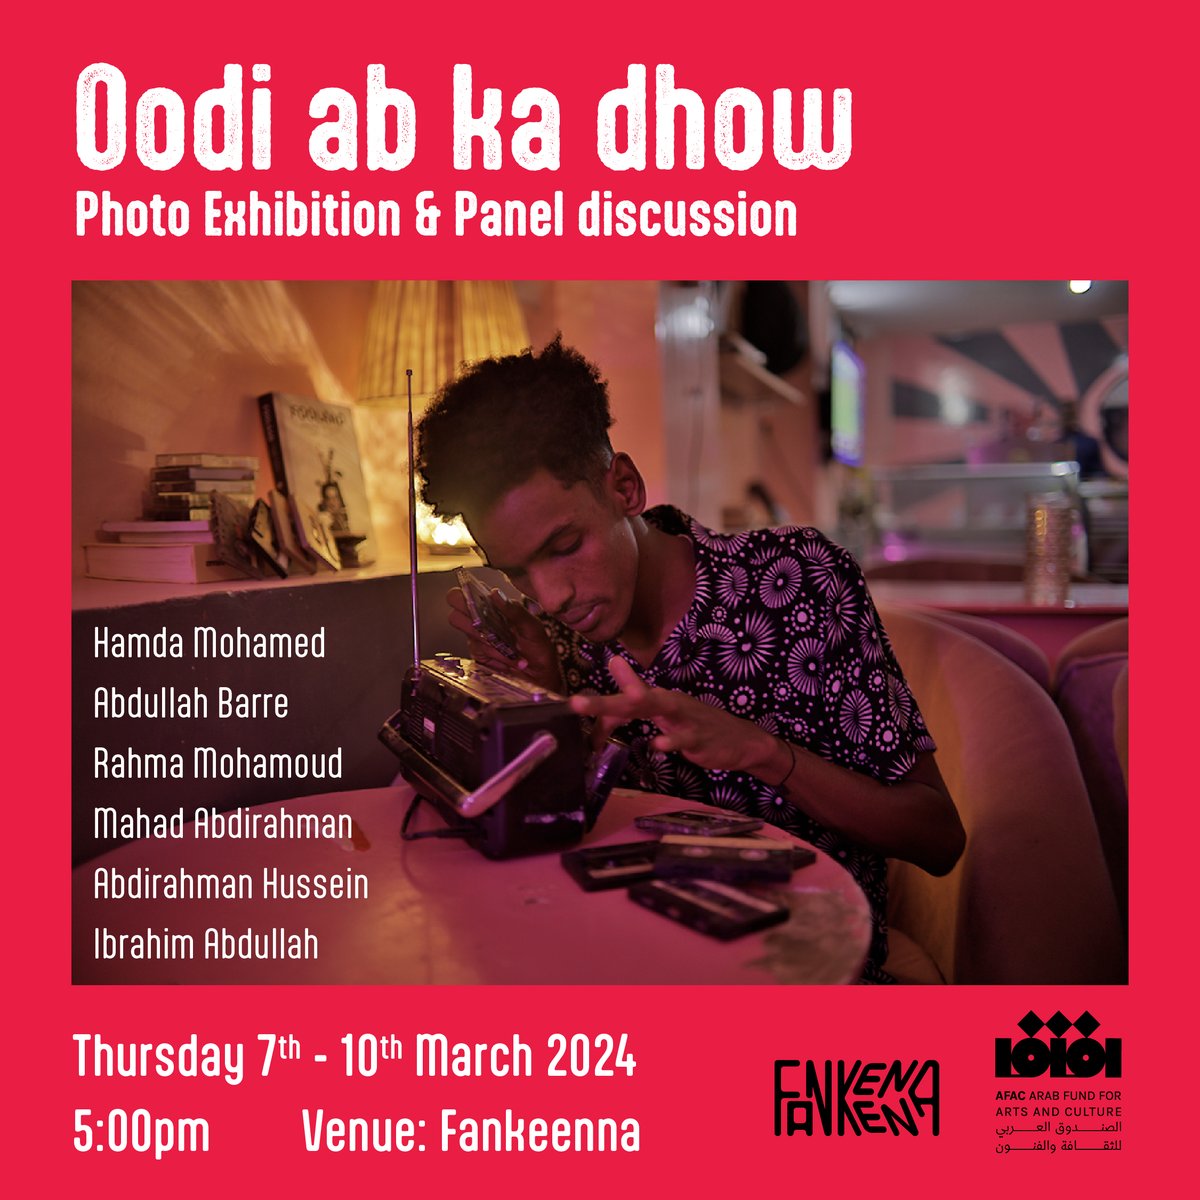 Join us for the opening of “Oodi ab Ka dhow” Photo exhibition & Panel discussion with different photo essays by different photographers. 5:00pm , Thursday 7th- Sunday 10th Mar @ #Fankeenna, Calaamdaha Area, Behind Telesom warehouse beside Gacalle hotel and City Gate Restaurant .